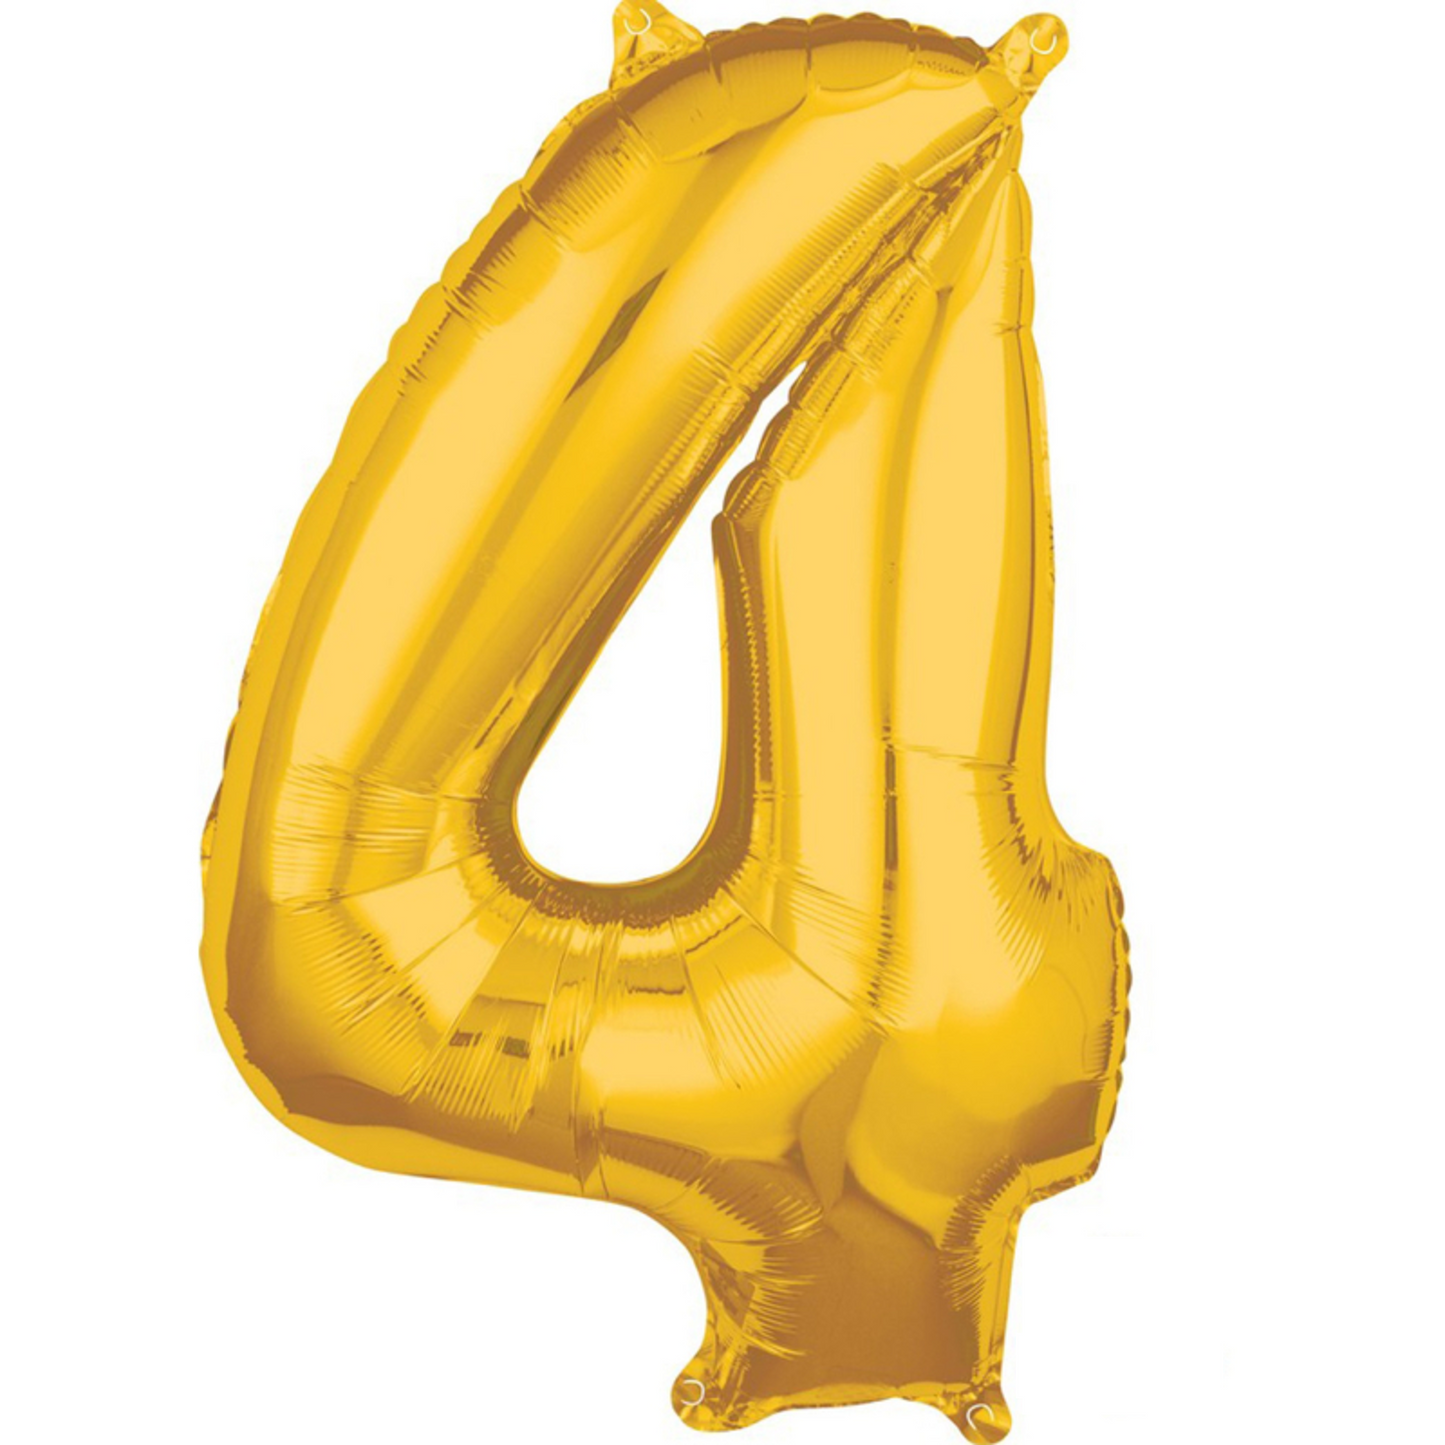 Number Balloon (Gold) / 86cm (34") Tall